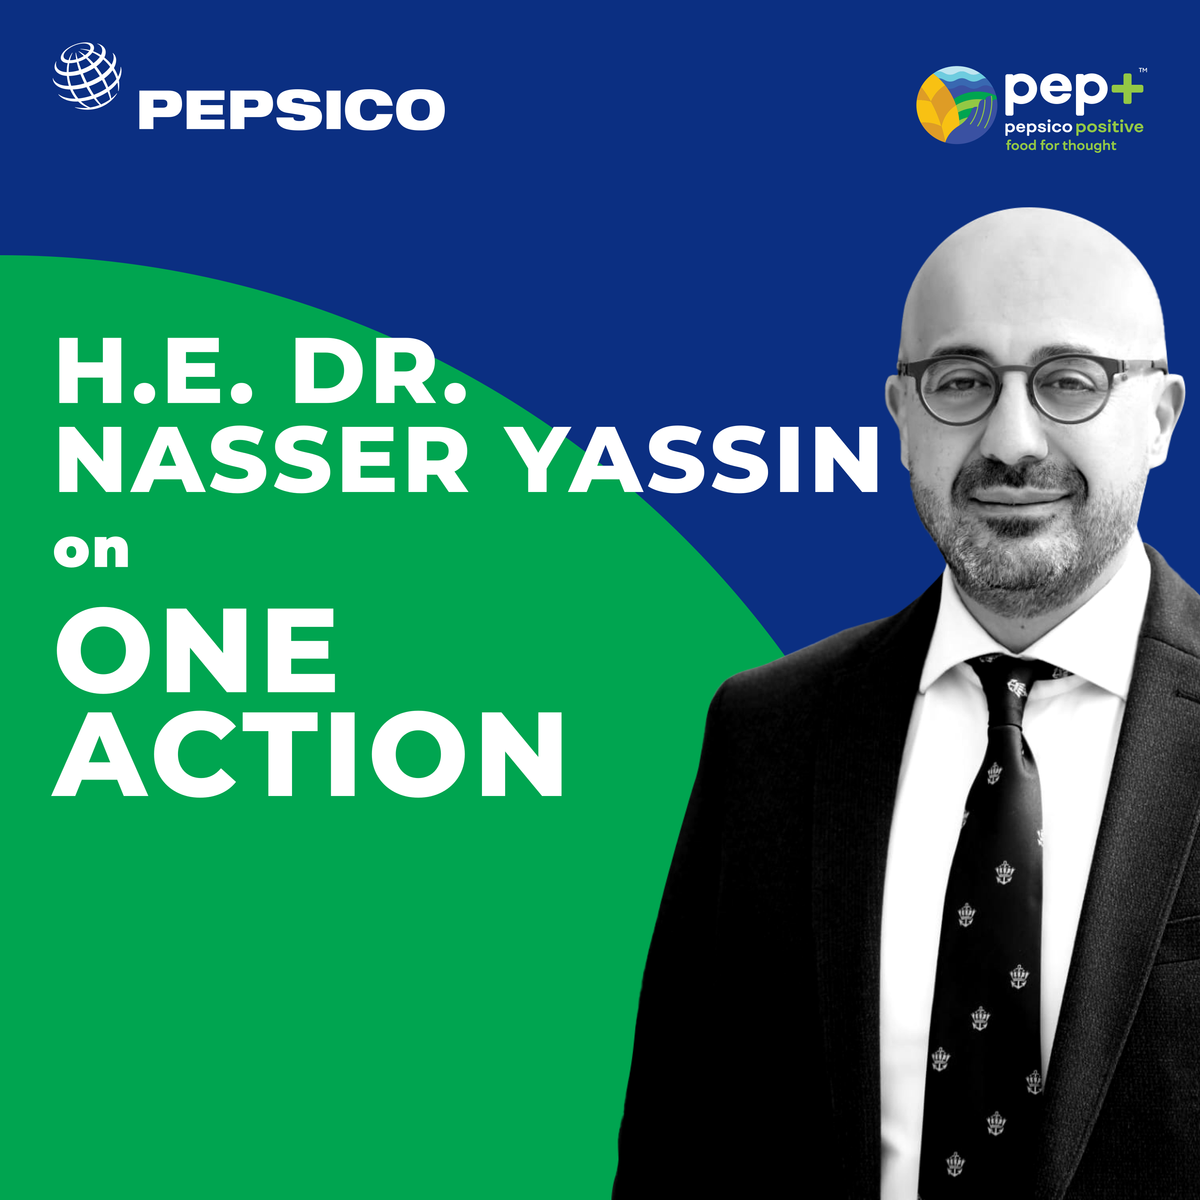 Public-Private partnership for a green recovery, with Dr. Nasser Yassin